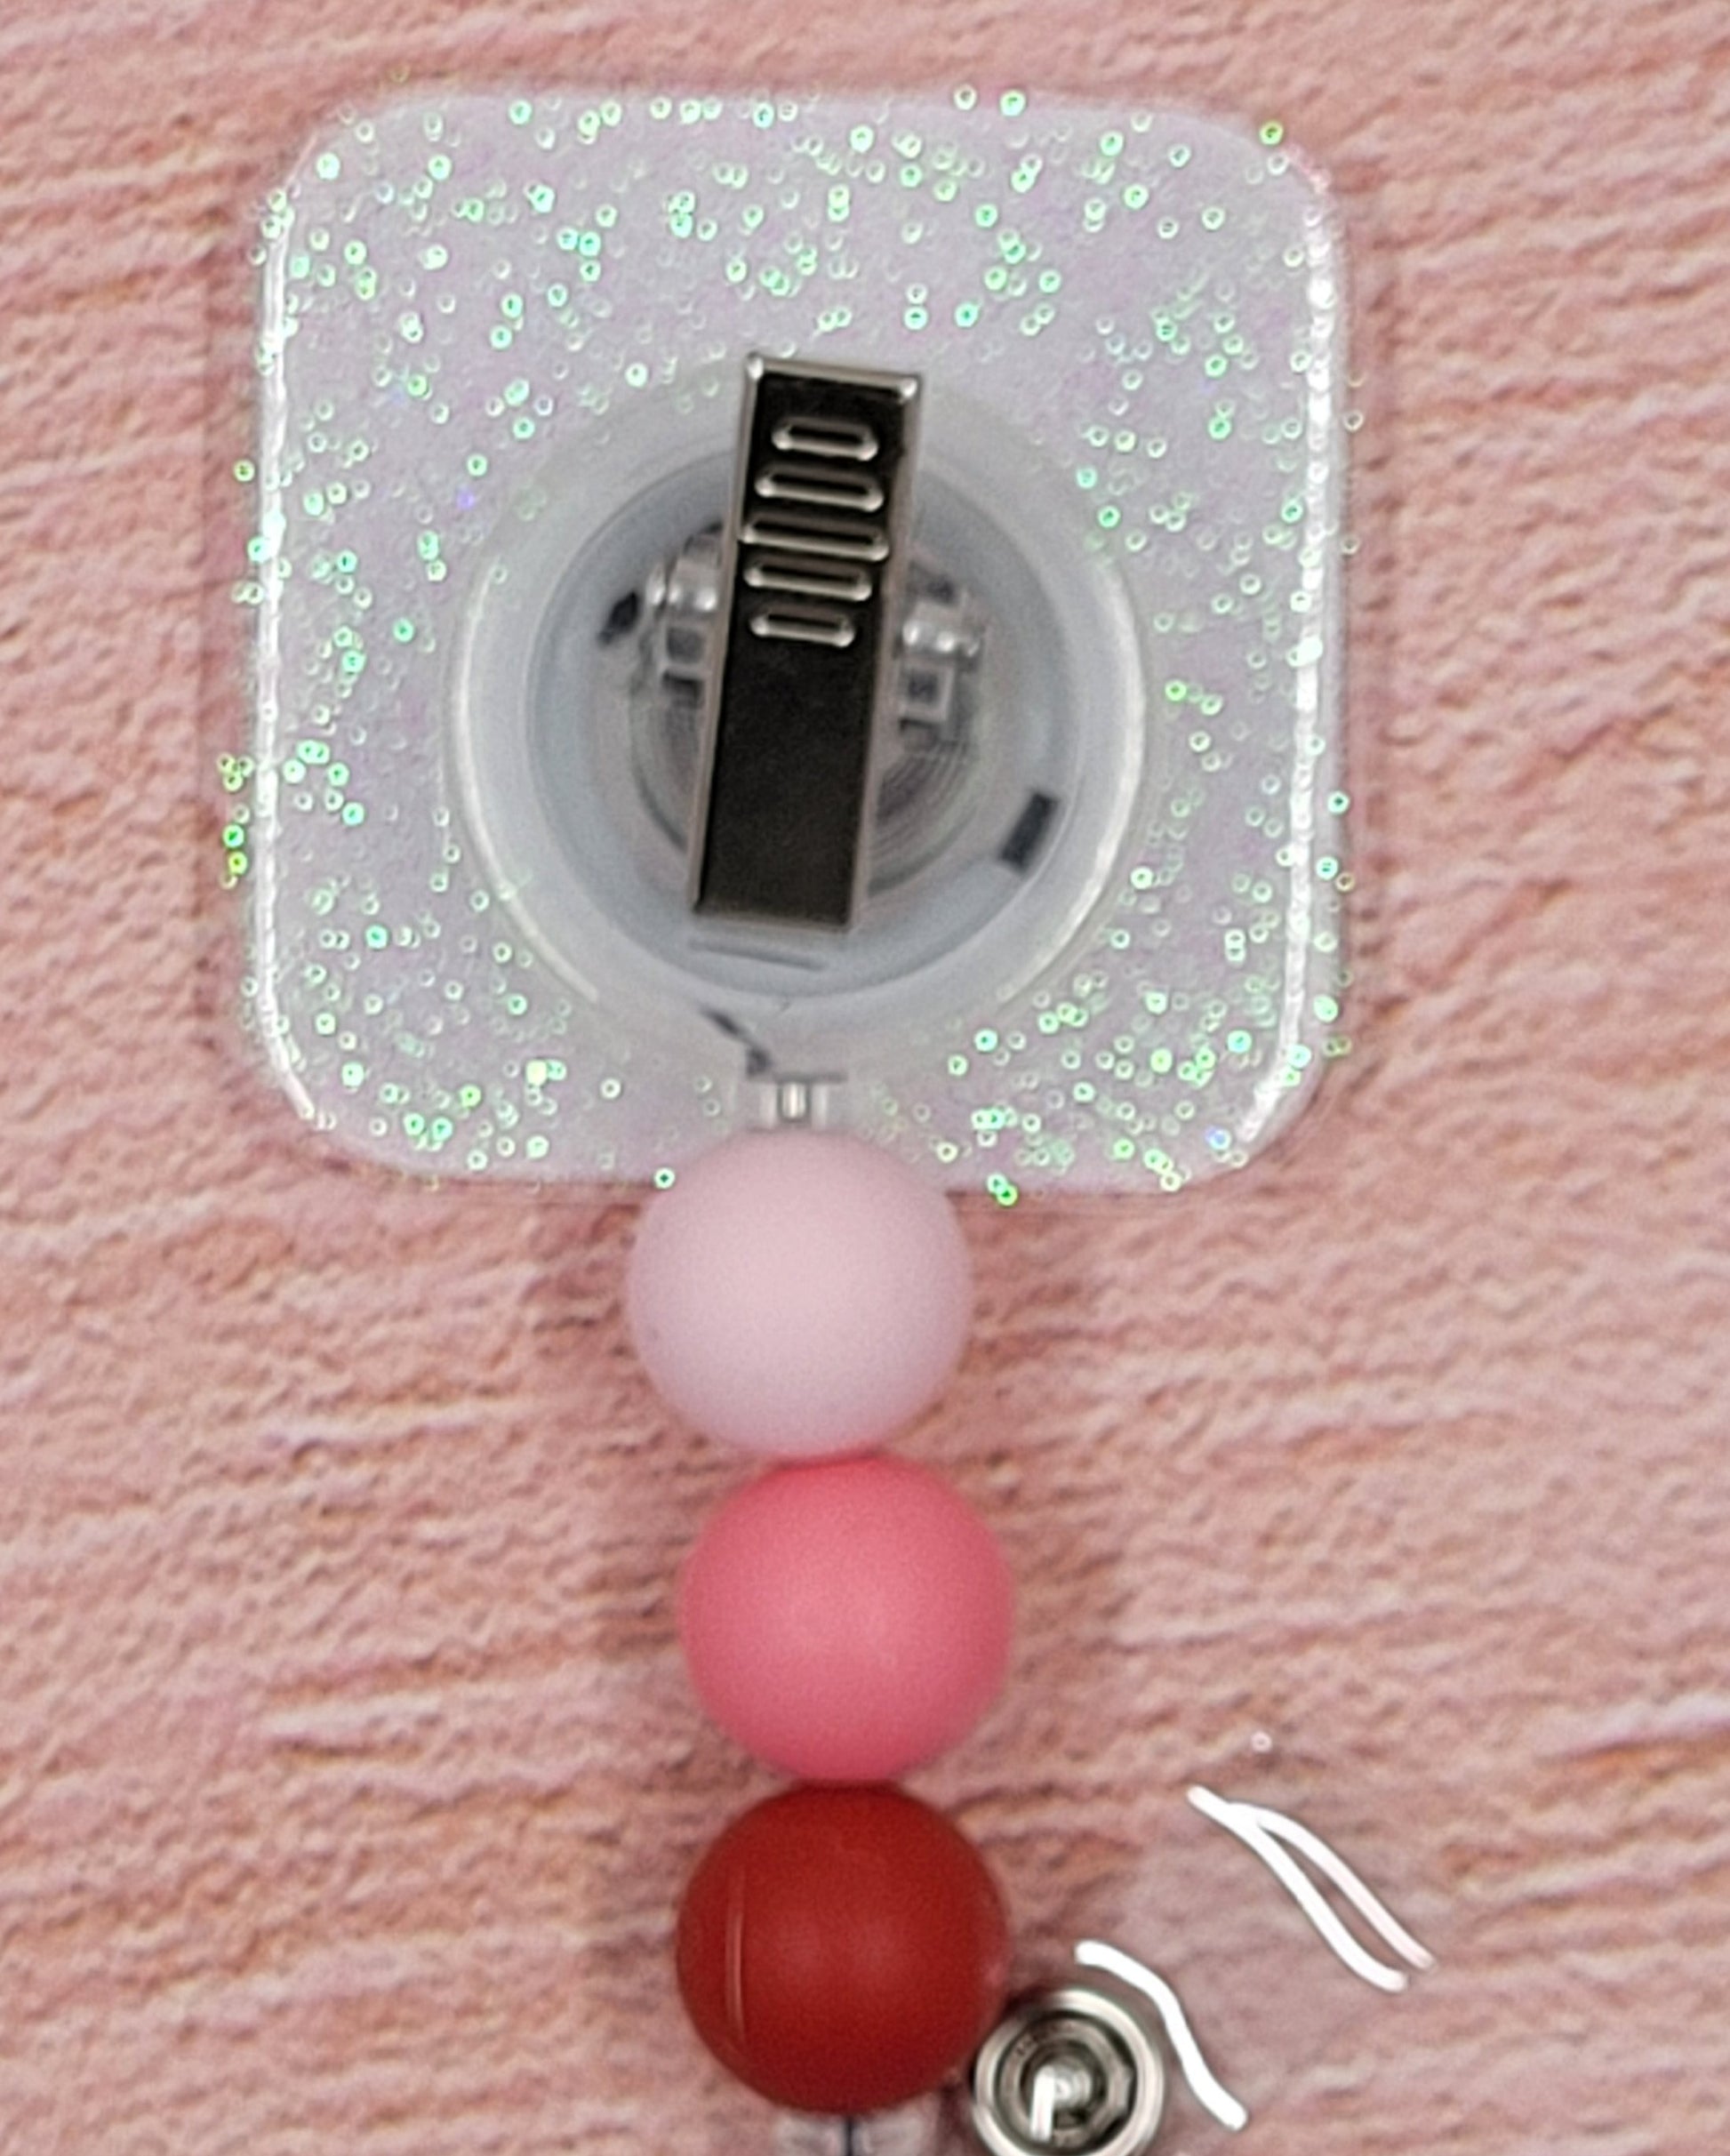 Tic Tac Toe has never been this cute where hearts are the big winner. The classic game with x's and hearts in white and reds on the pink base board Adding to its festive appeal is an iridescent glitter base, accompanied by three silicone beads in coordinated colors. Elevating your style for the holiday season, this is a must-have accessory.